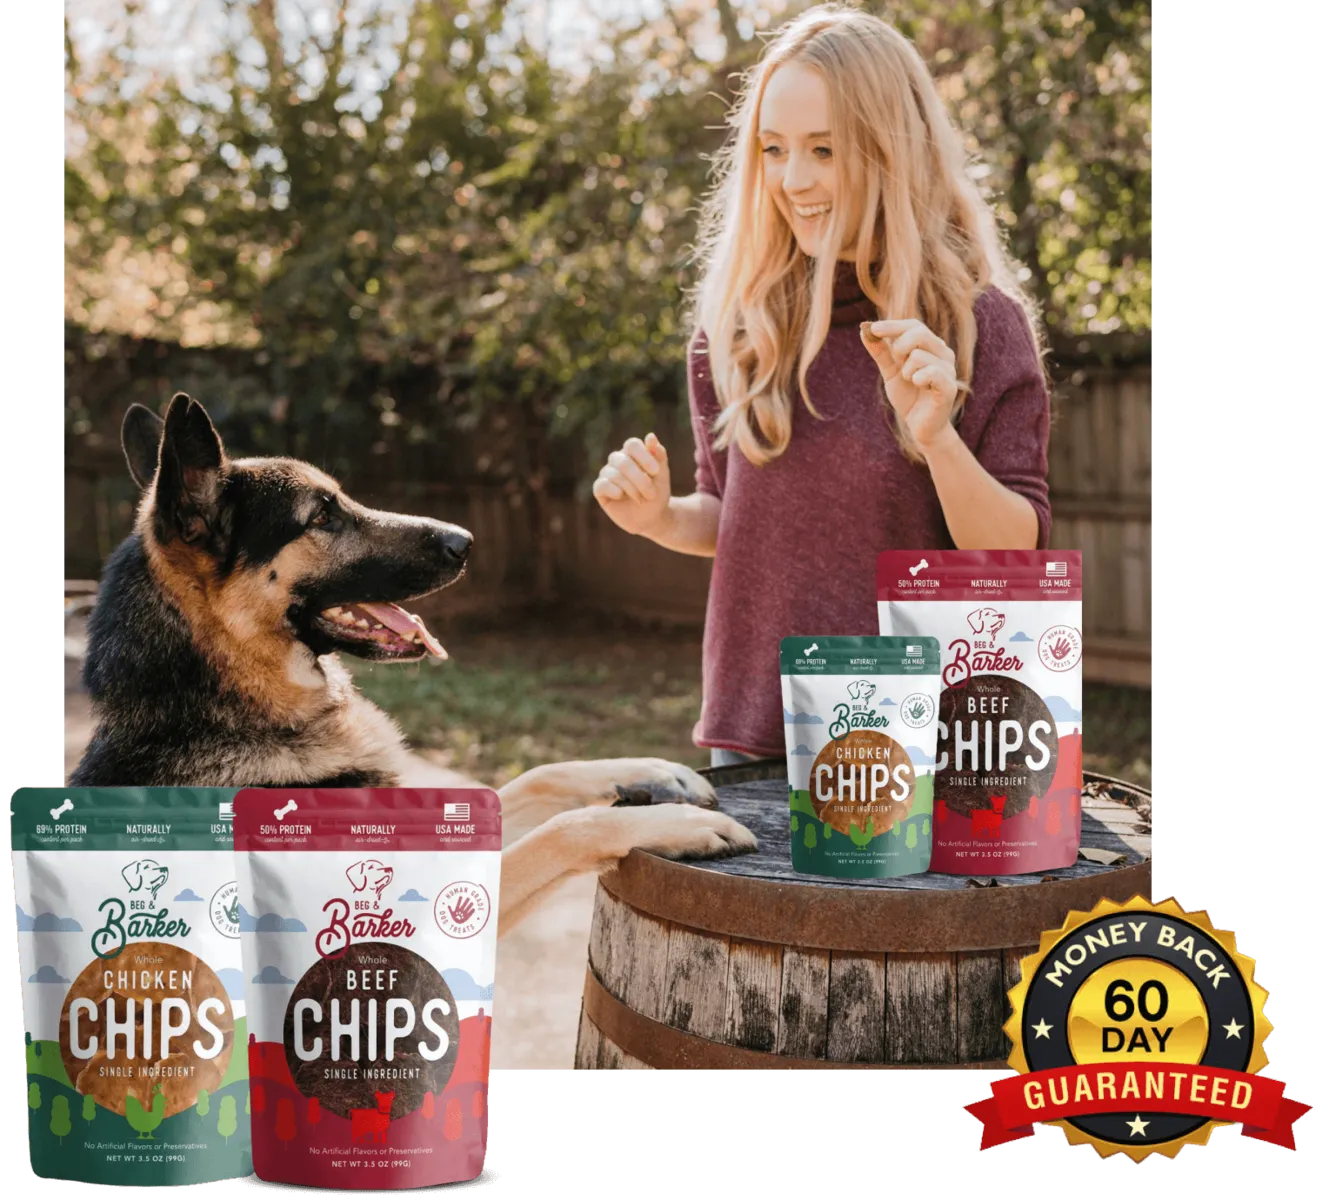 Subscribe & Get Beg & Barker Chicken and Beef Chips